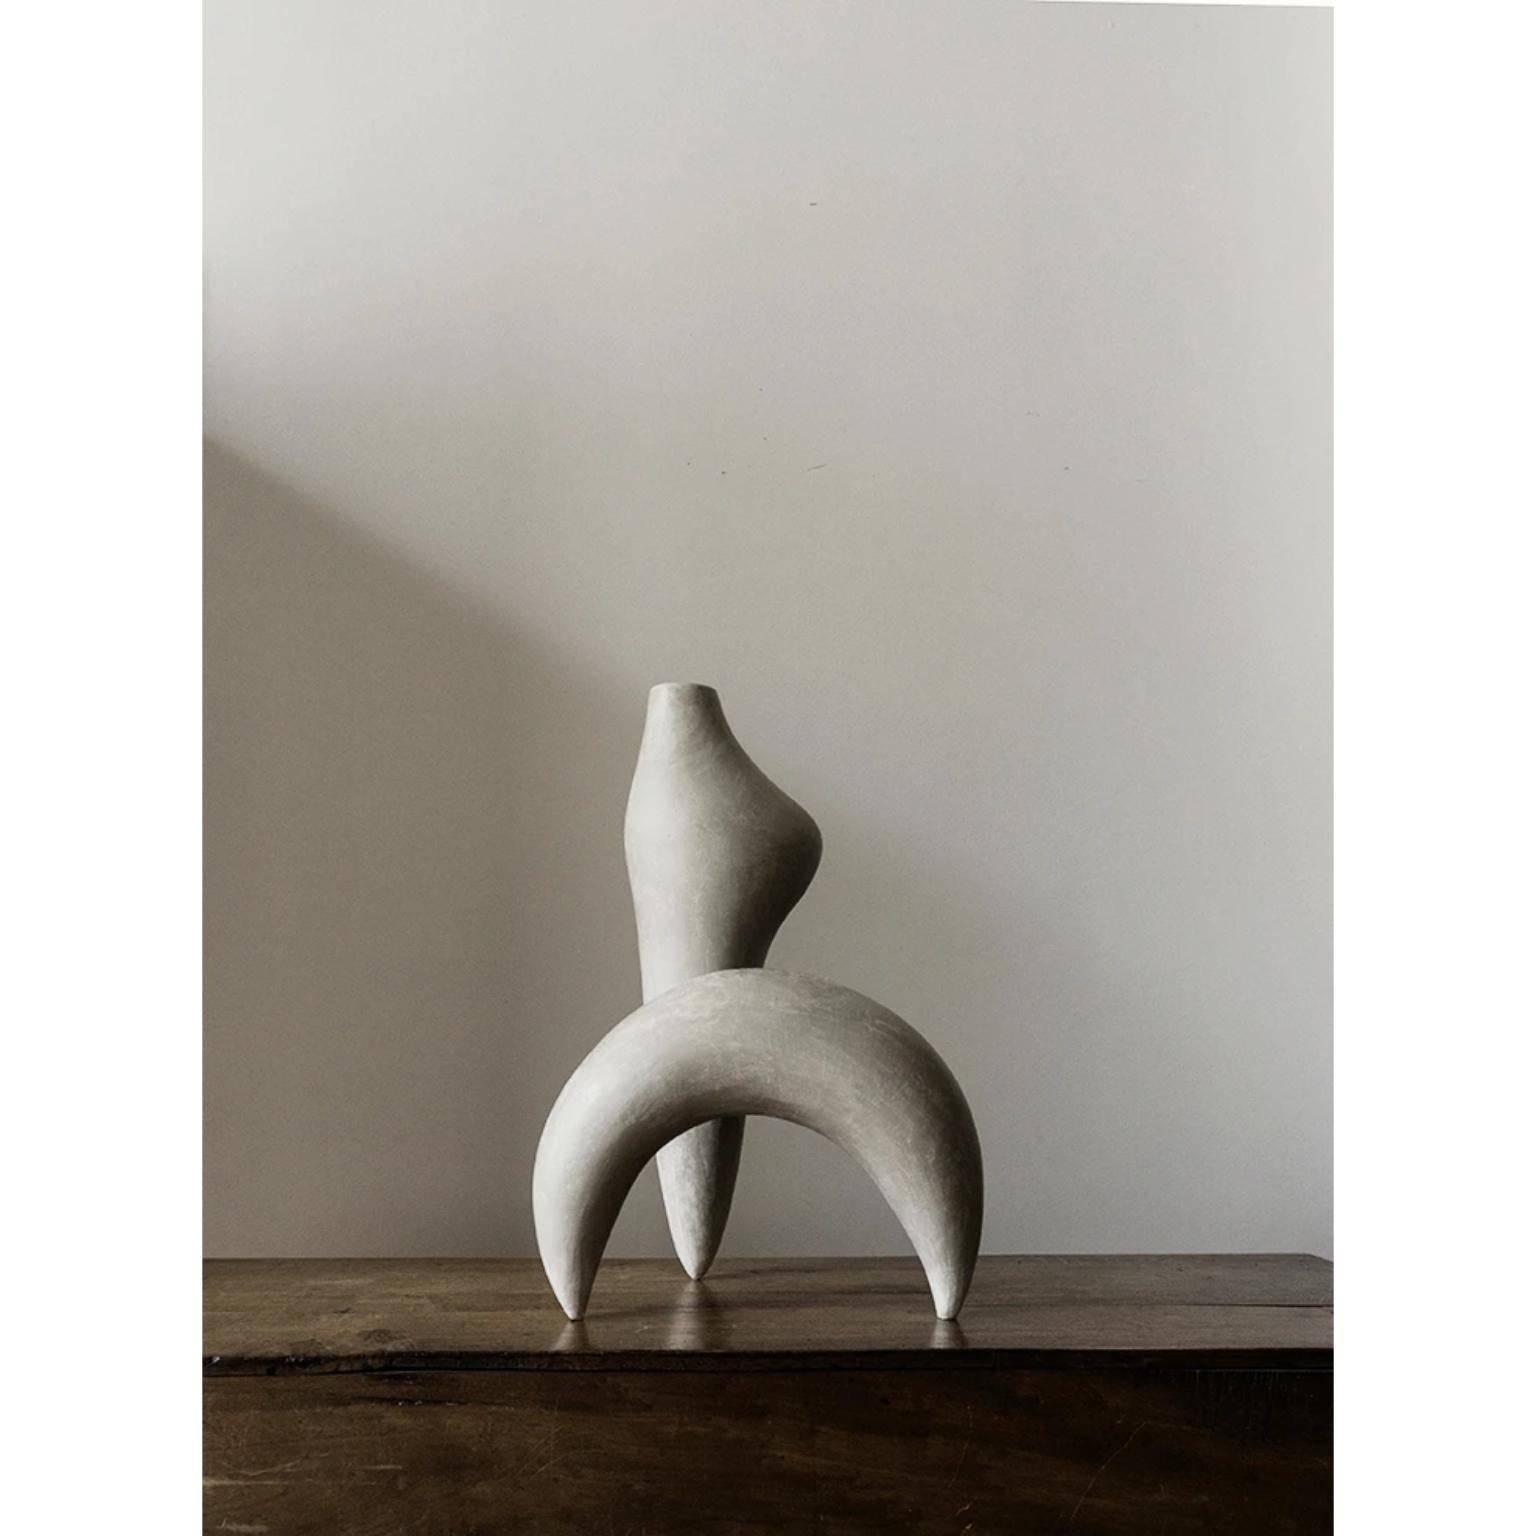 Lamium vase by Cosmin Florea.
Unique piece.
Dimensions: W 33 x D 30 x H 50 cm.
Materials: Stoneware.

Inspired by my love for pristine nature, this sculptural vase channels the shape of a dove.
Handcrafted in white stoneware, the Dove vase can